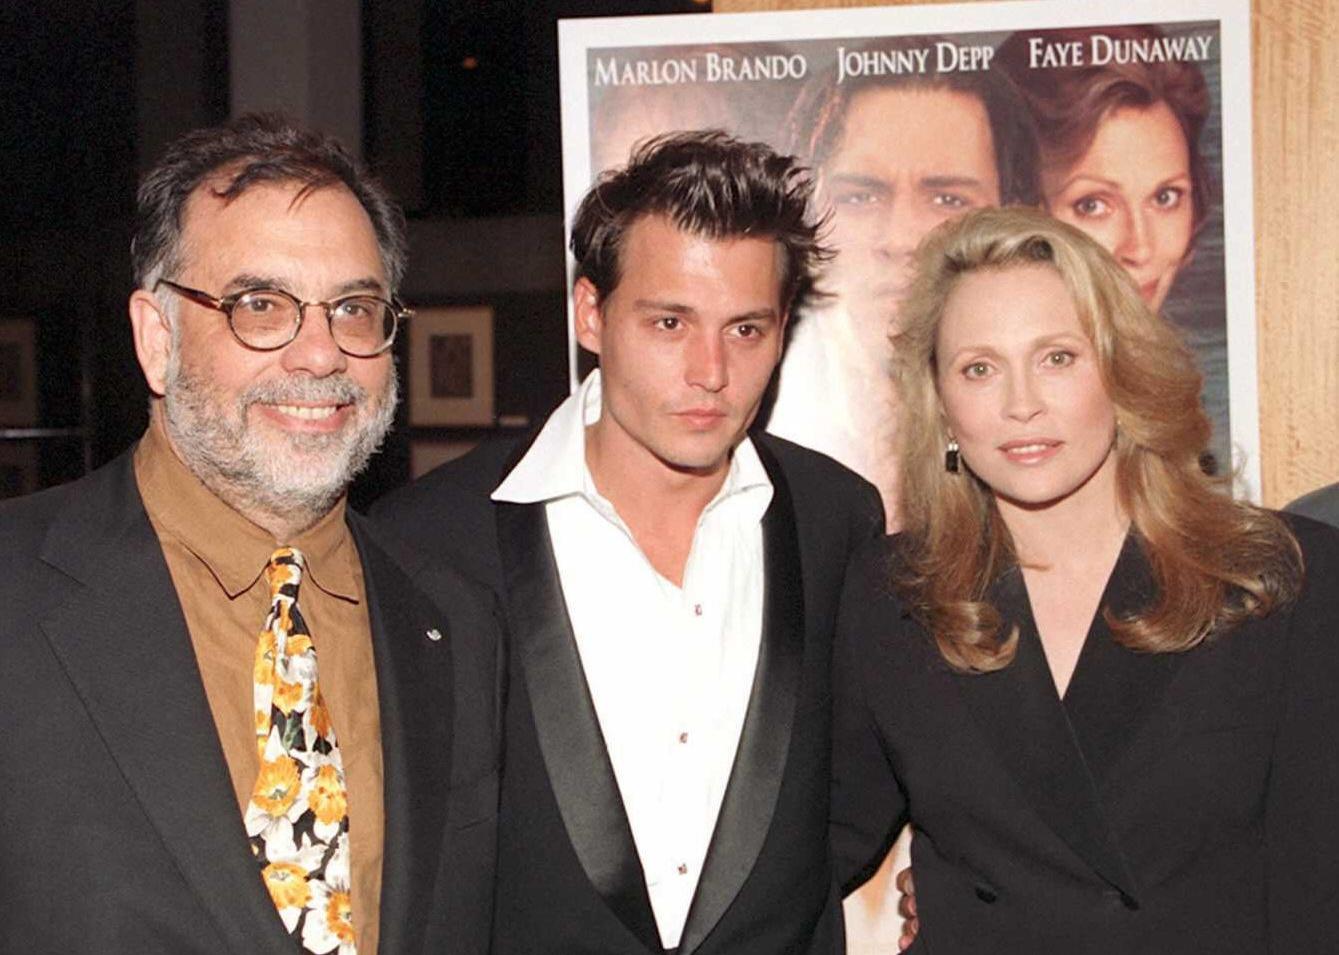 Producer Francis Ford Coppola poses with Johnny Depp and Faye Dunaway at the premiere of "Don Juan DeMarco".